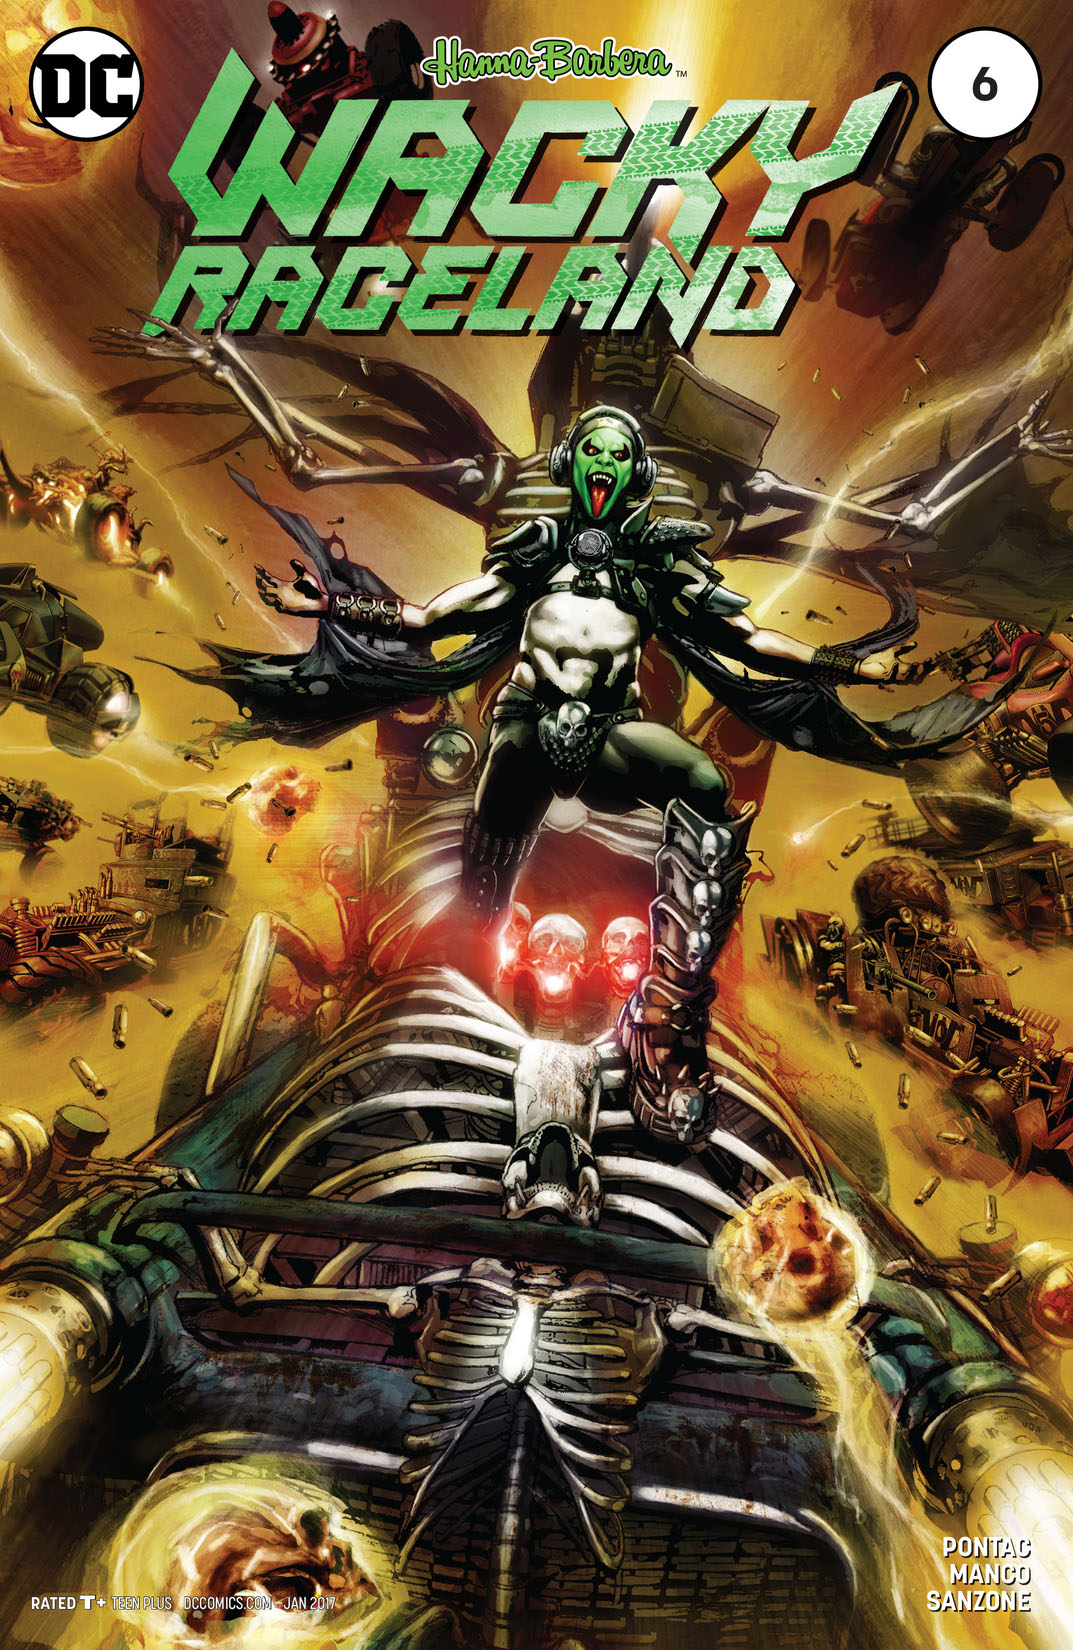 Wacky Raceland #6 preview images